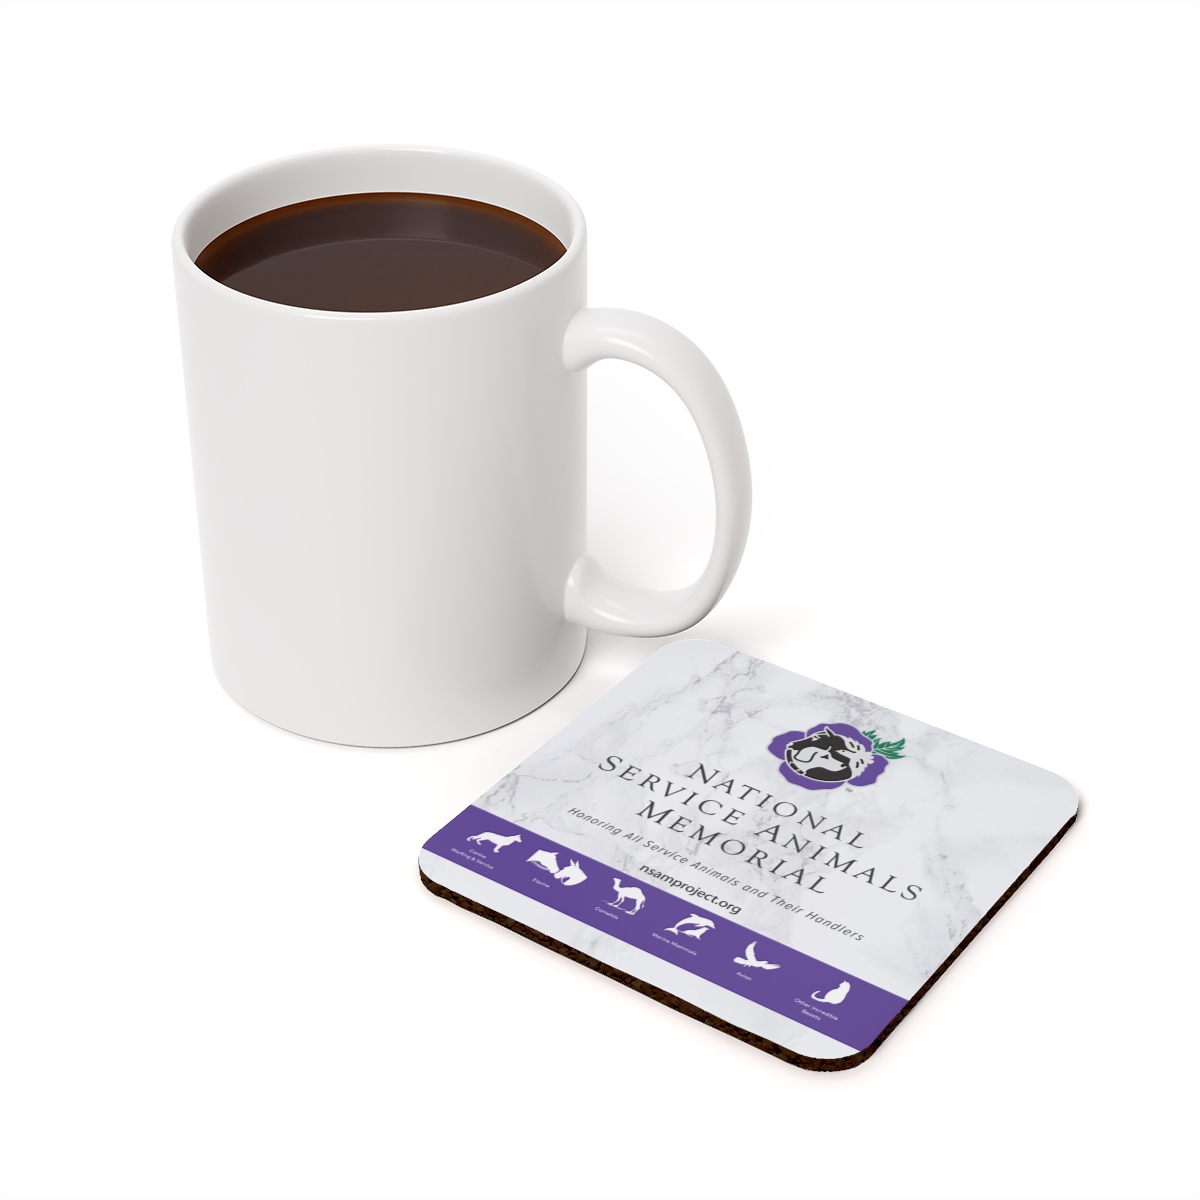 $10 recurring donor gift - cork backed coaster (mug not included)